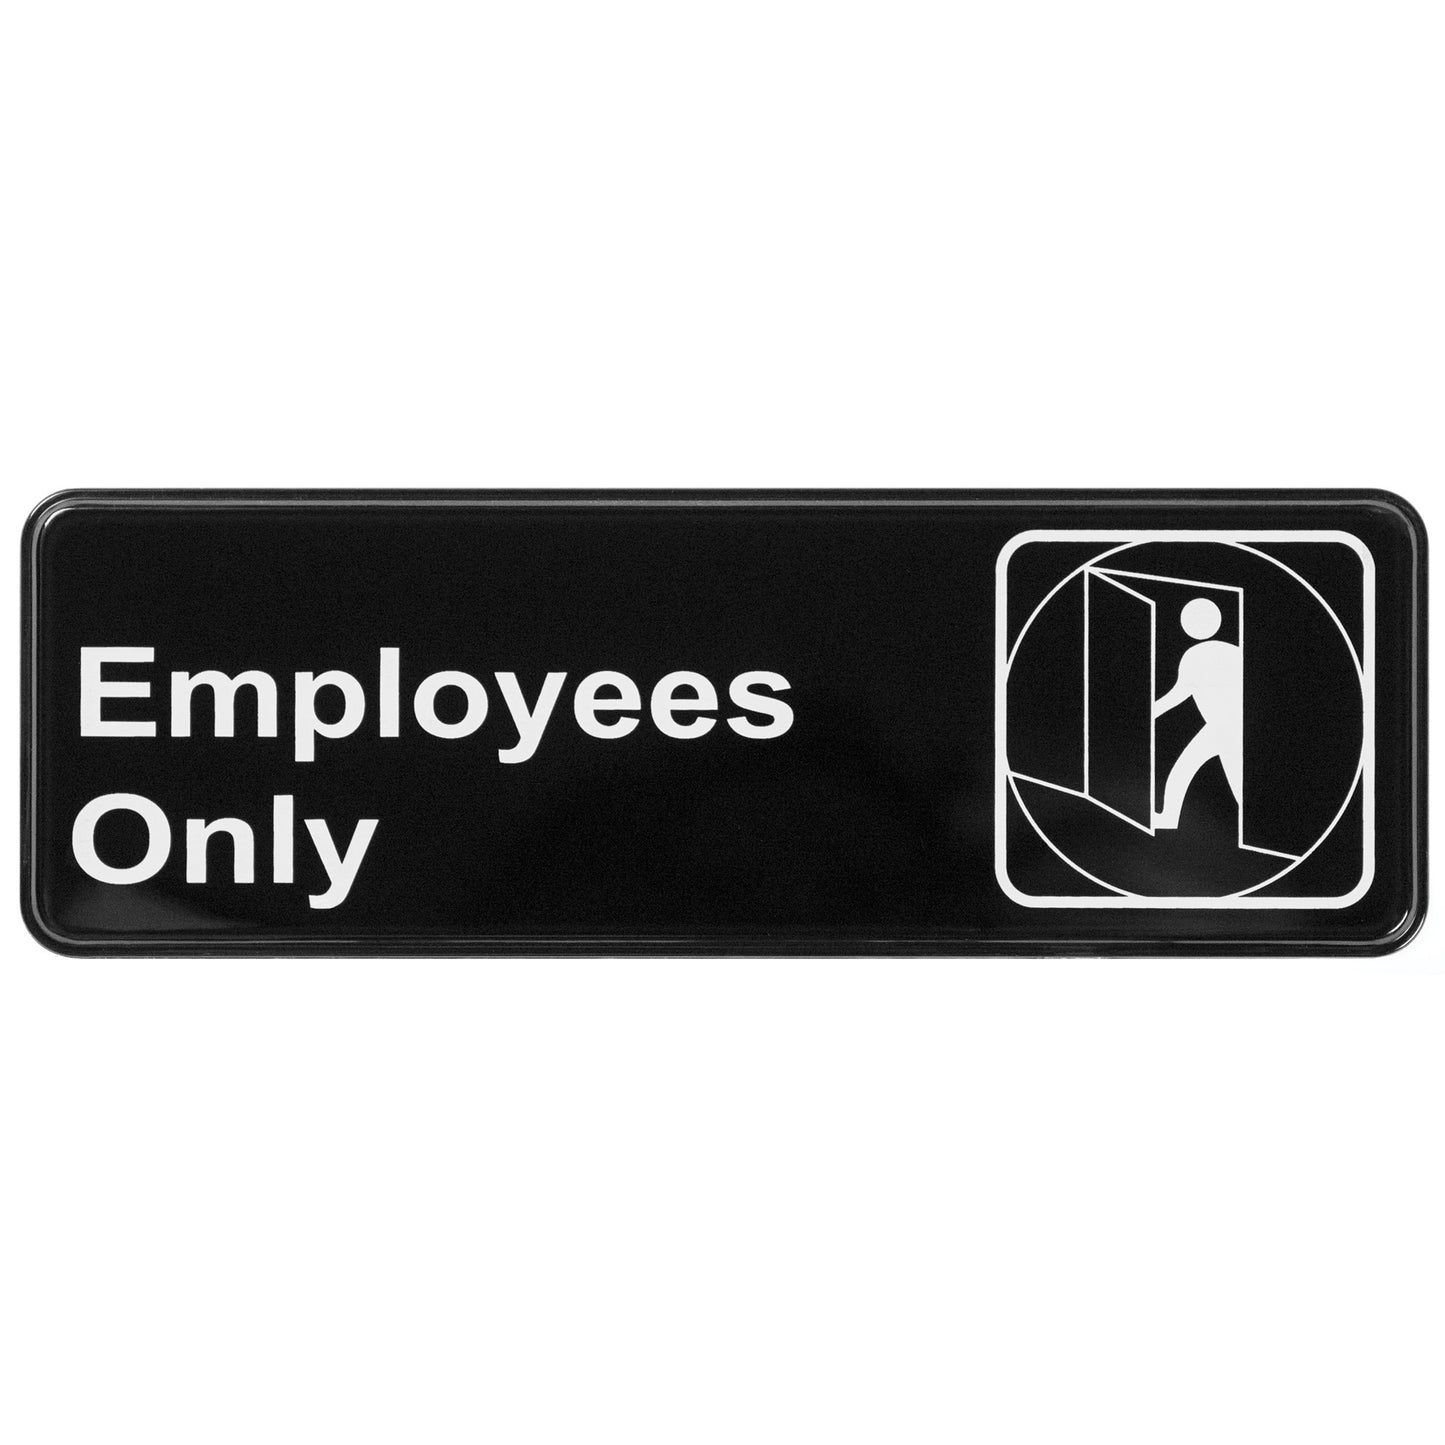 SGN-305 - Information Signs, 9"W x 3"H - SGN-305 - Employees Only